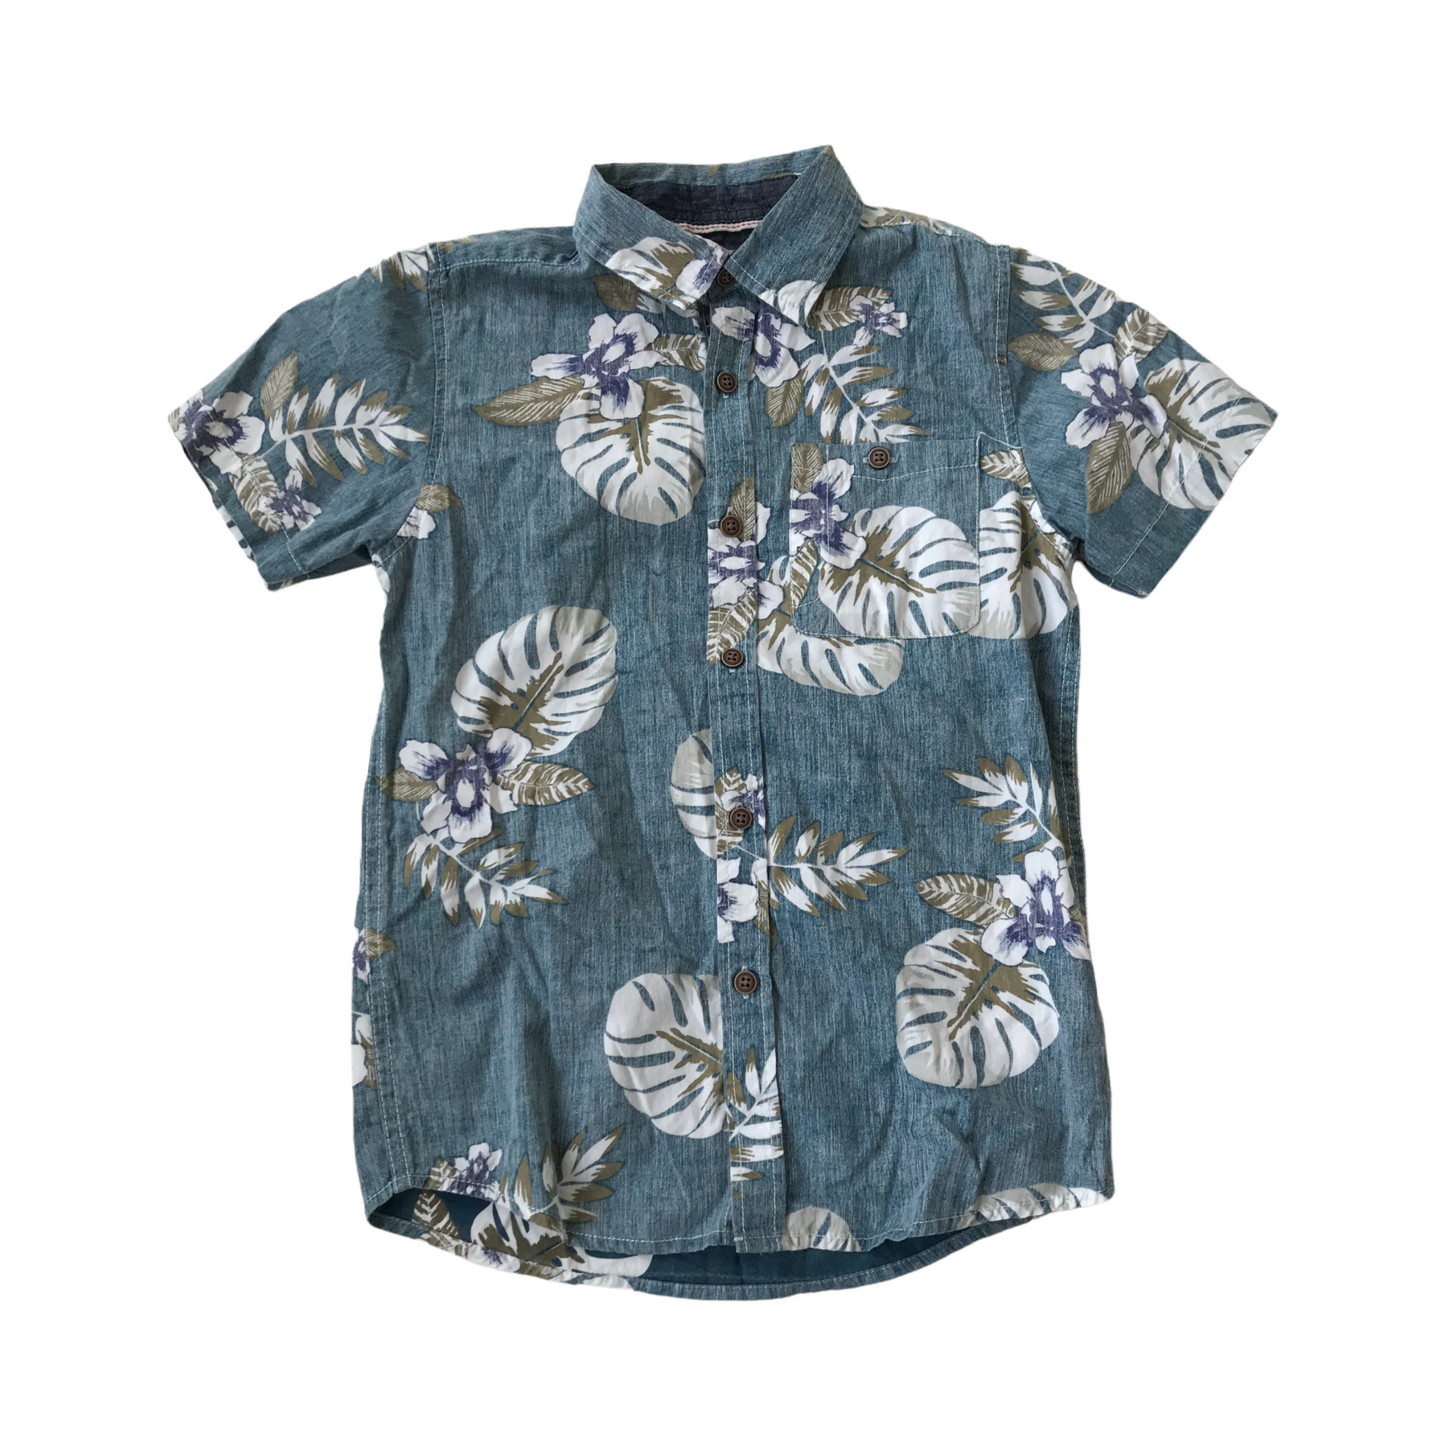 Light Washed-out-style Blue Floral Short Sleeve Shirt Age 10